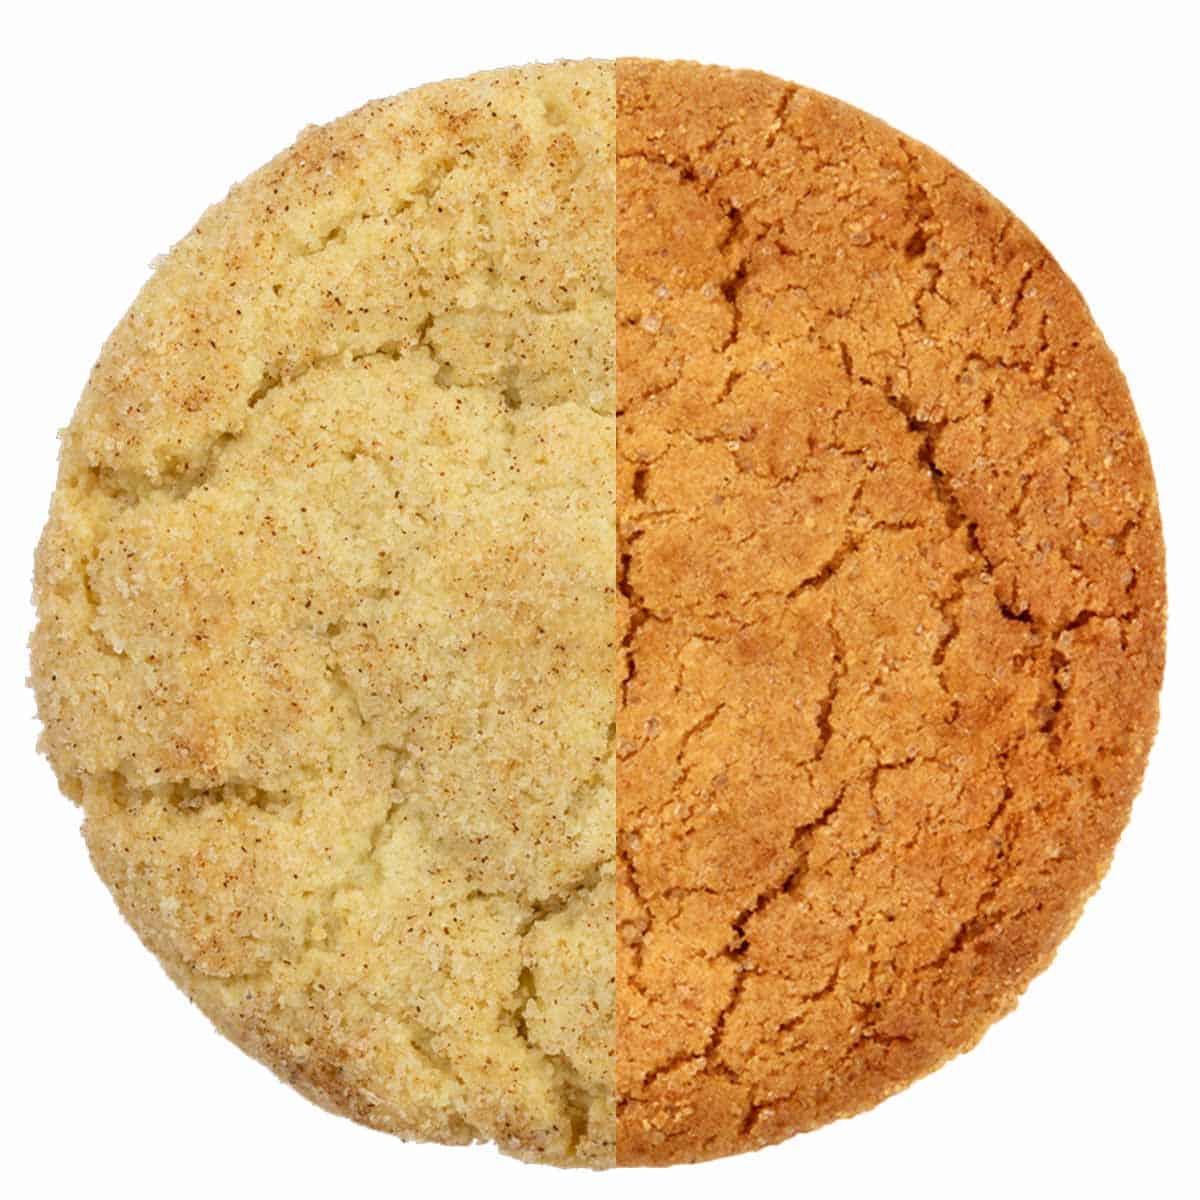 Half a snickerdoodle and half a gingersnap lined up together looking like 1 cookie.